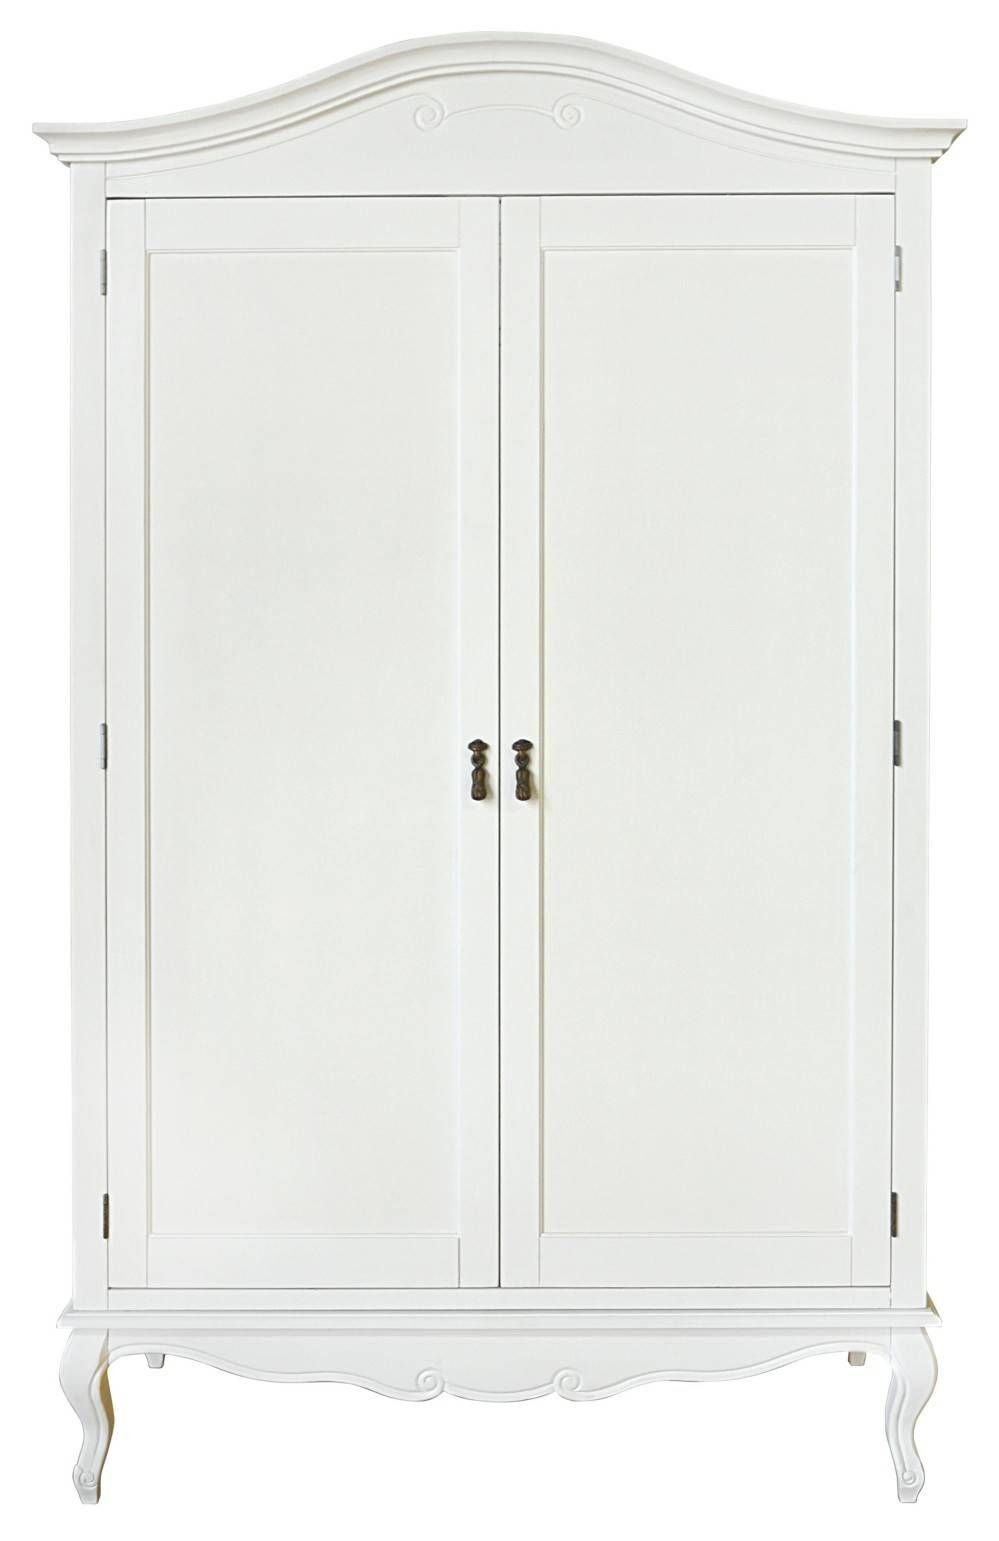 Wardrobes | Bedroom Furniture Direct With Double Rail White Wardrobes (View 1 of 21)